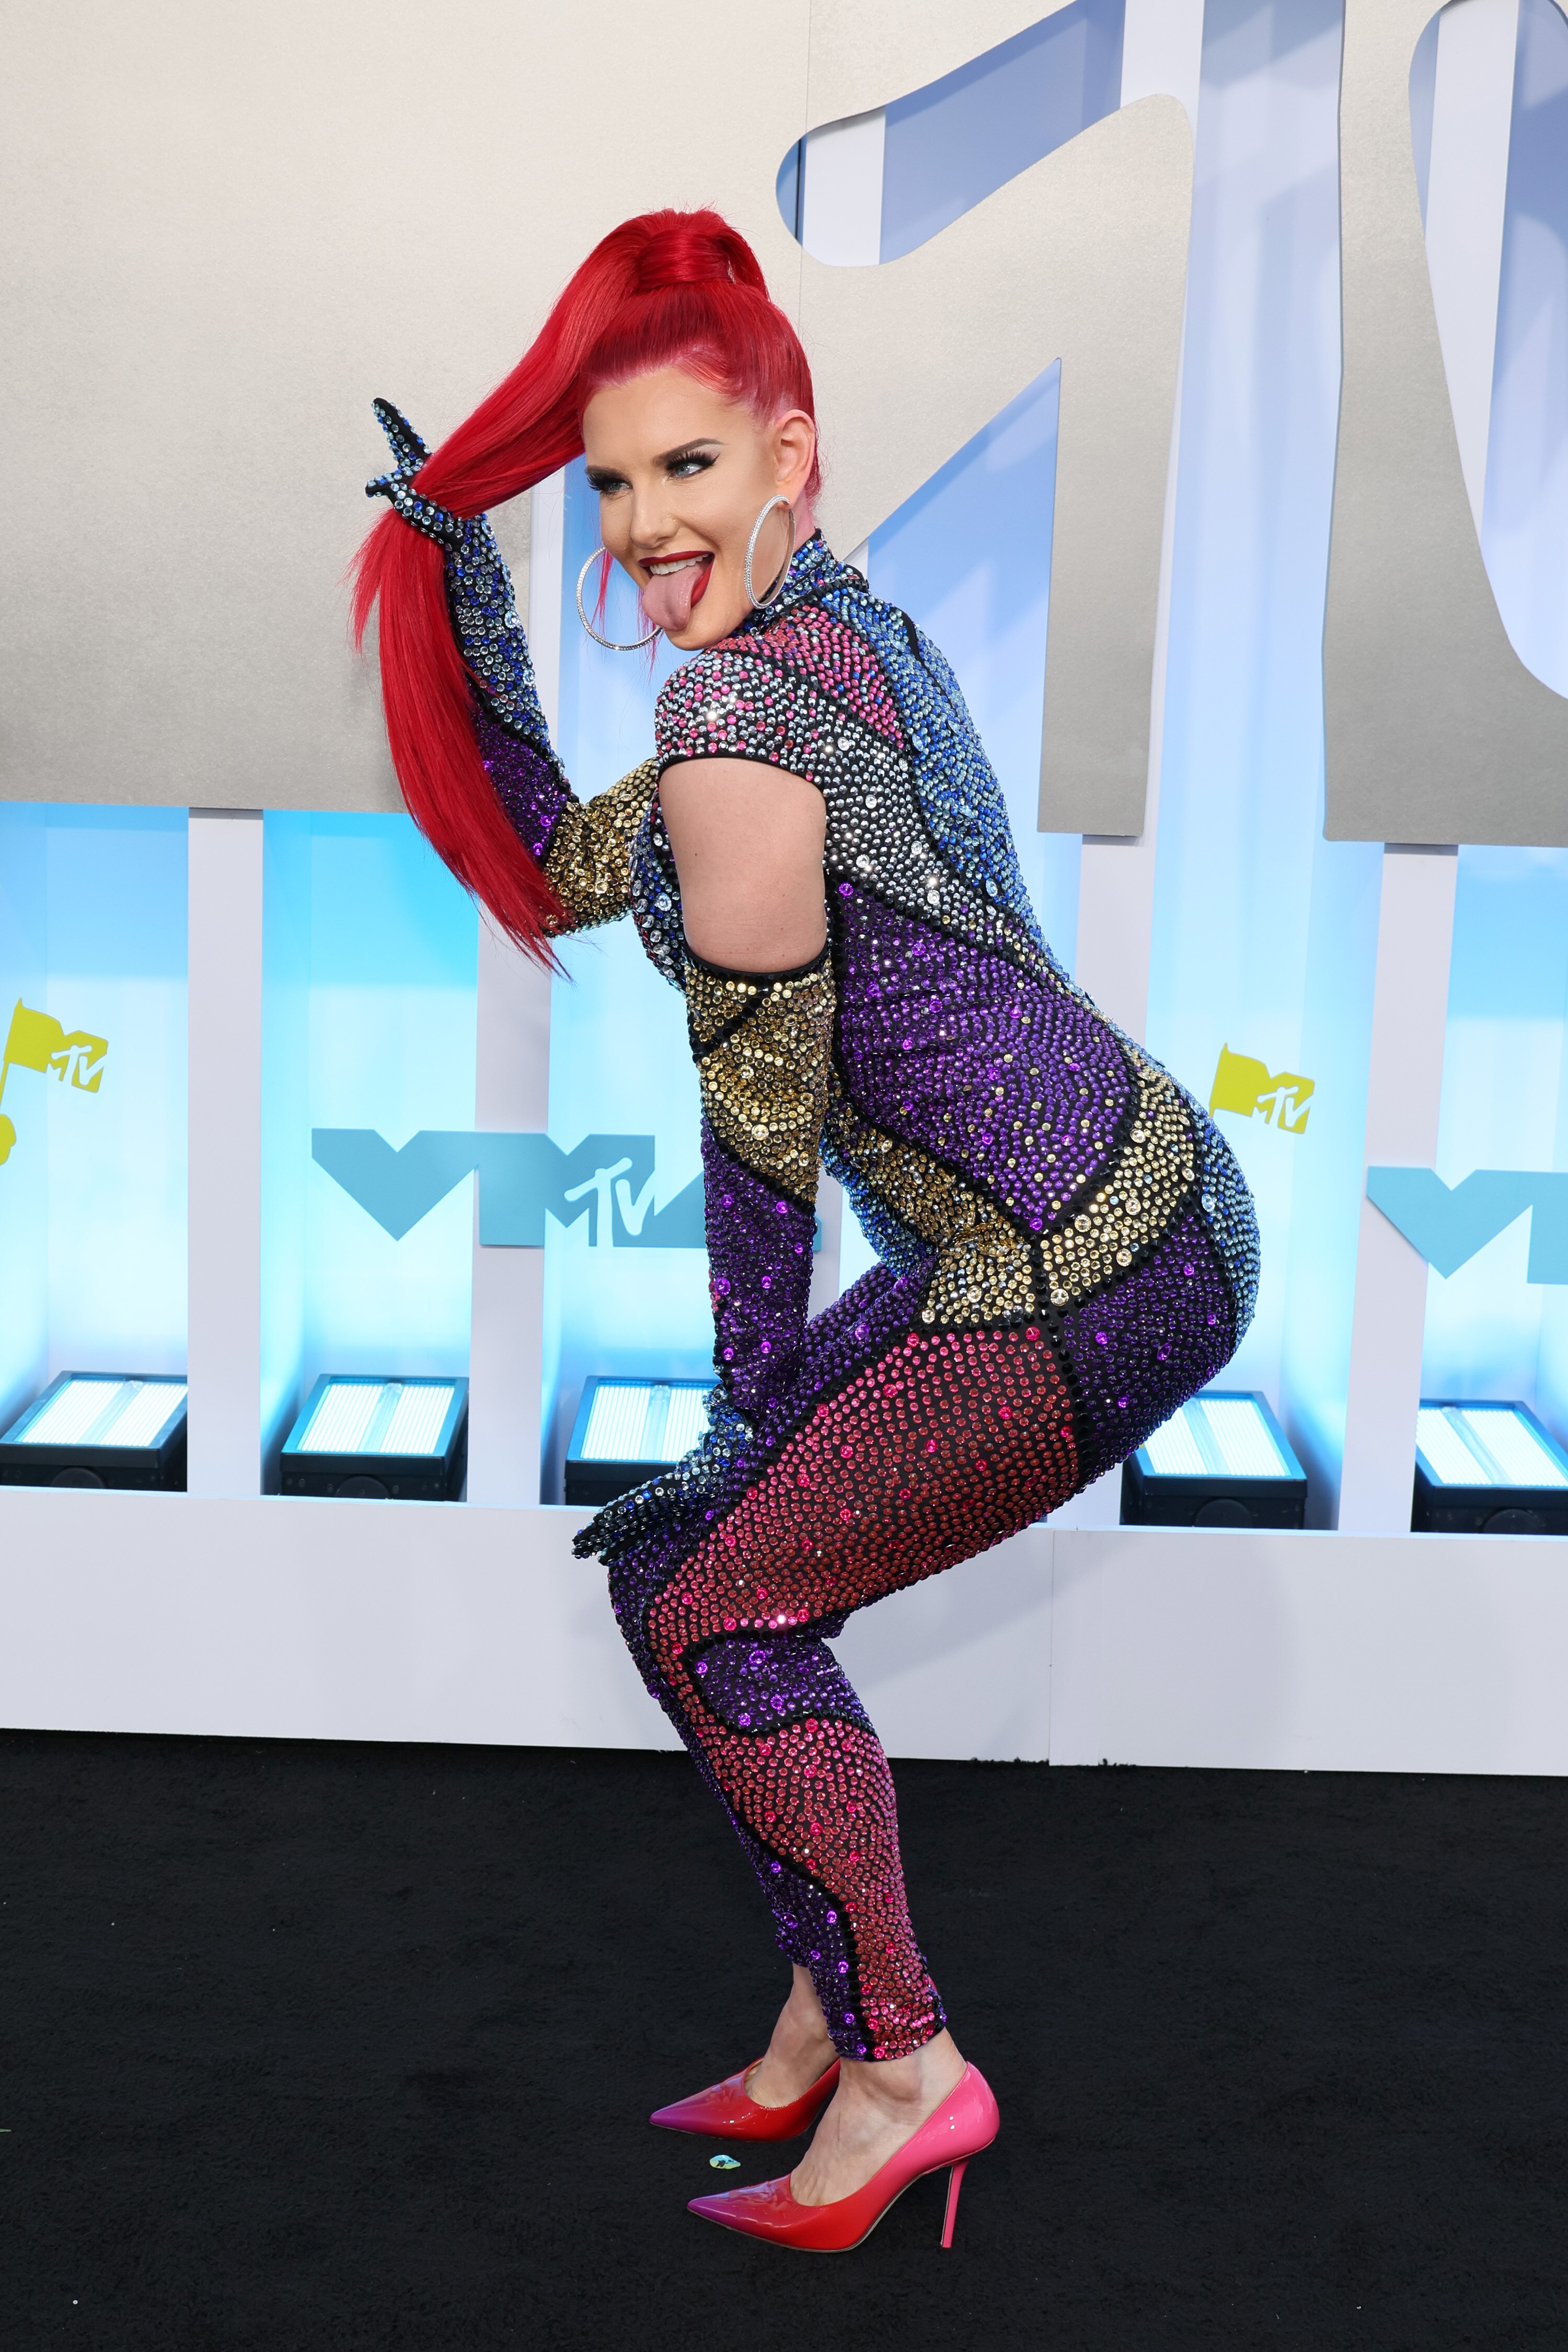 justina valentine poses on an arrivals carpet holding her bright red ponytail and sticking her tongue out